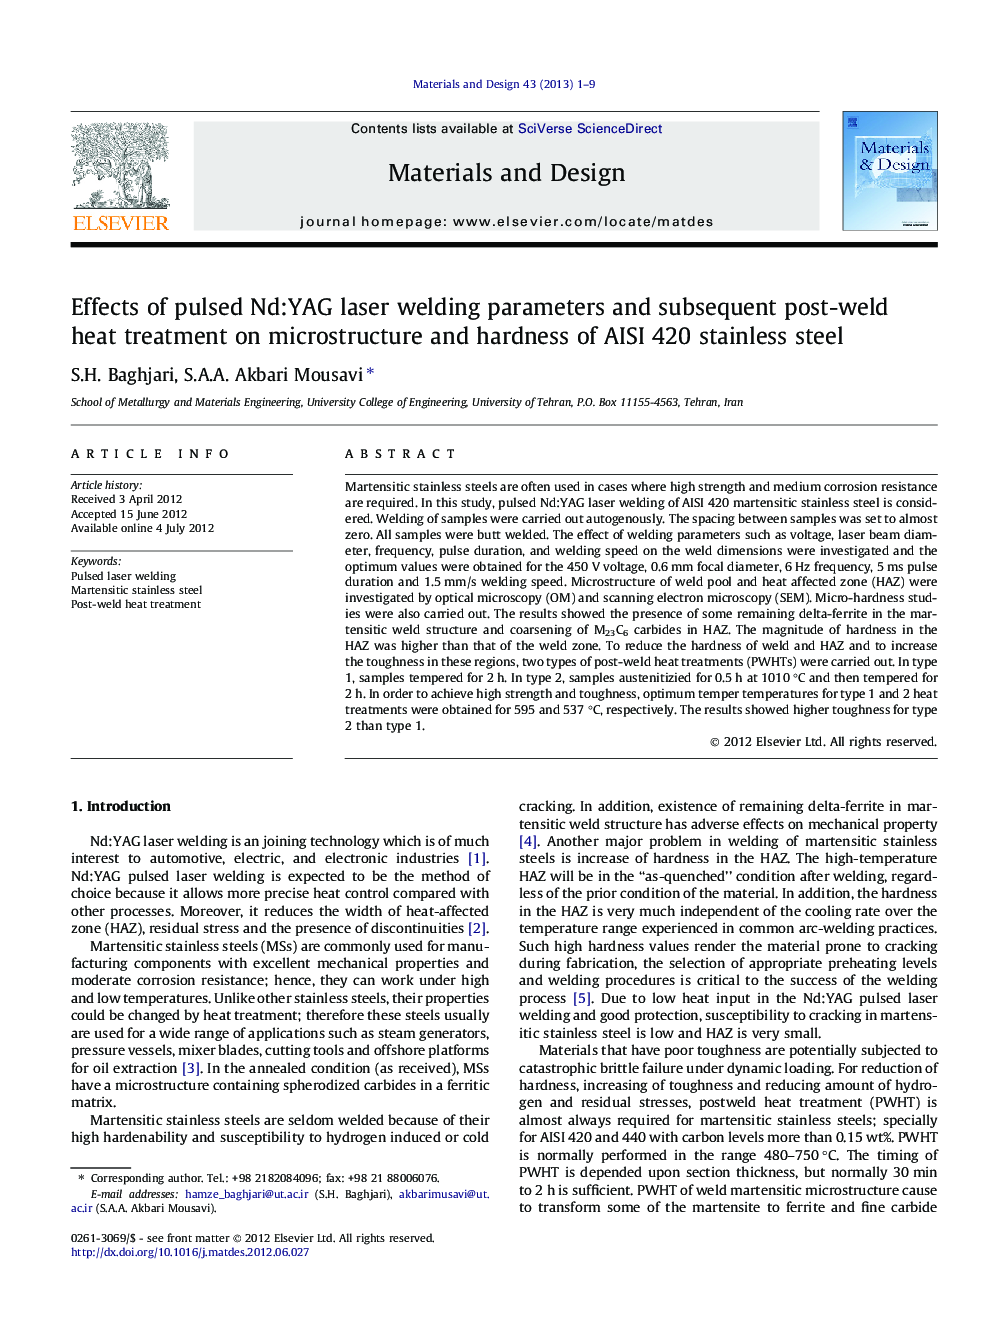 Effects of pulsed Nd:YAG laser welding parameters and subsequent post-weld heat treatment on microstructure and hardness of AISI 420 stainless steel